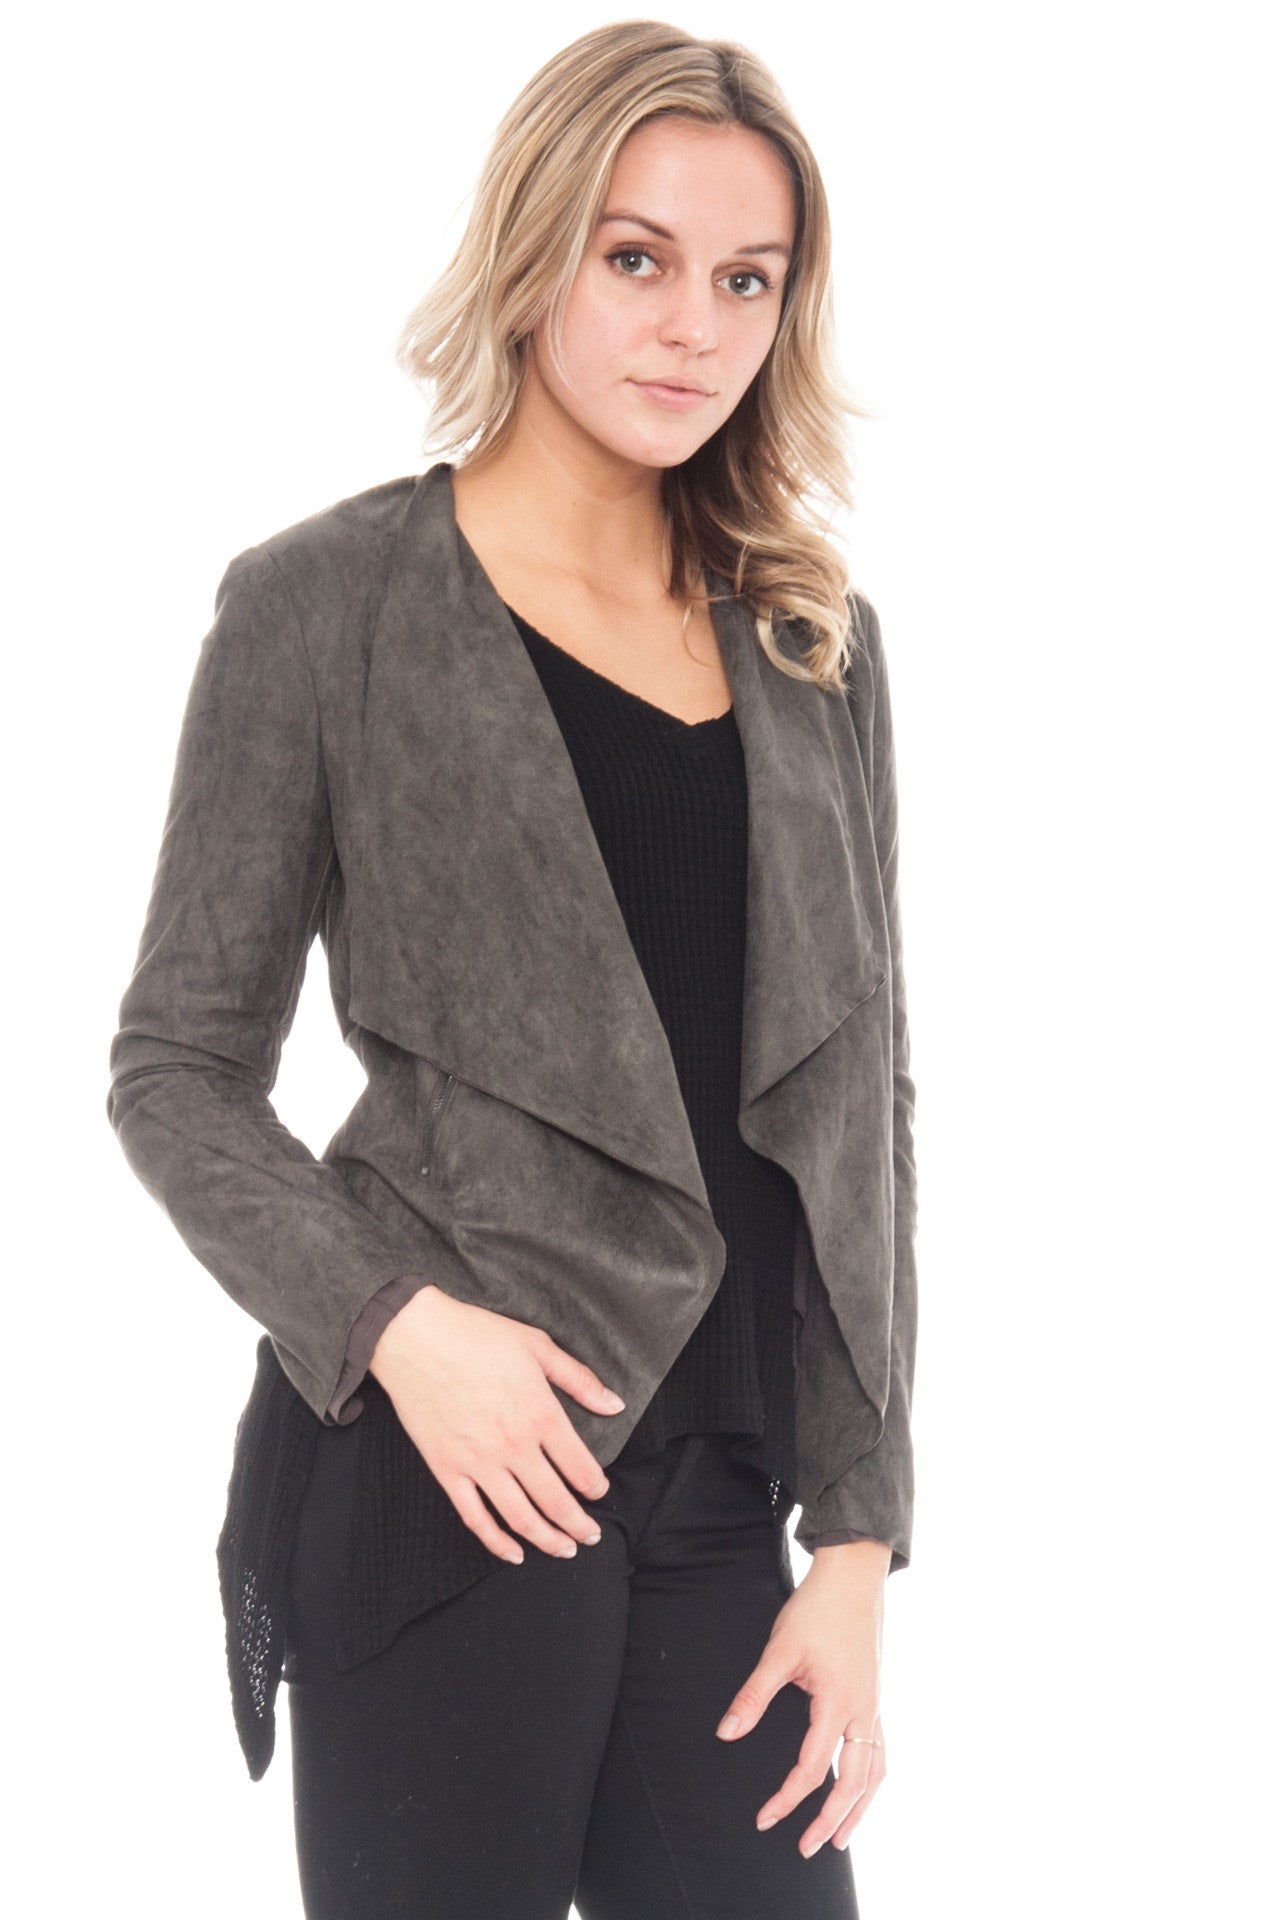 Jacket - Suede Open Front By Lush